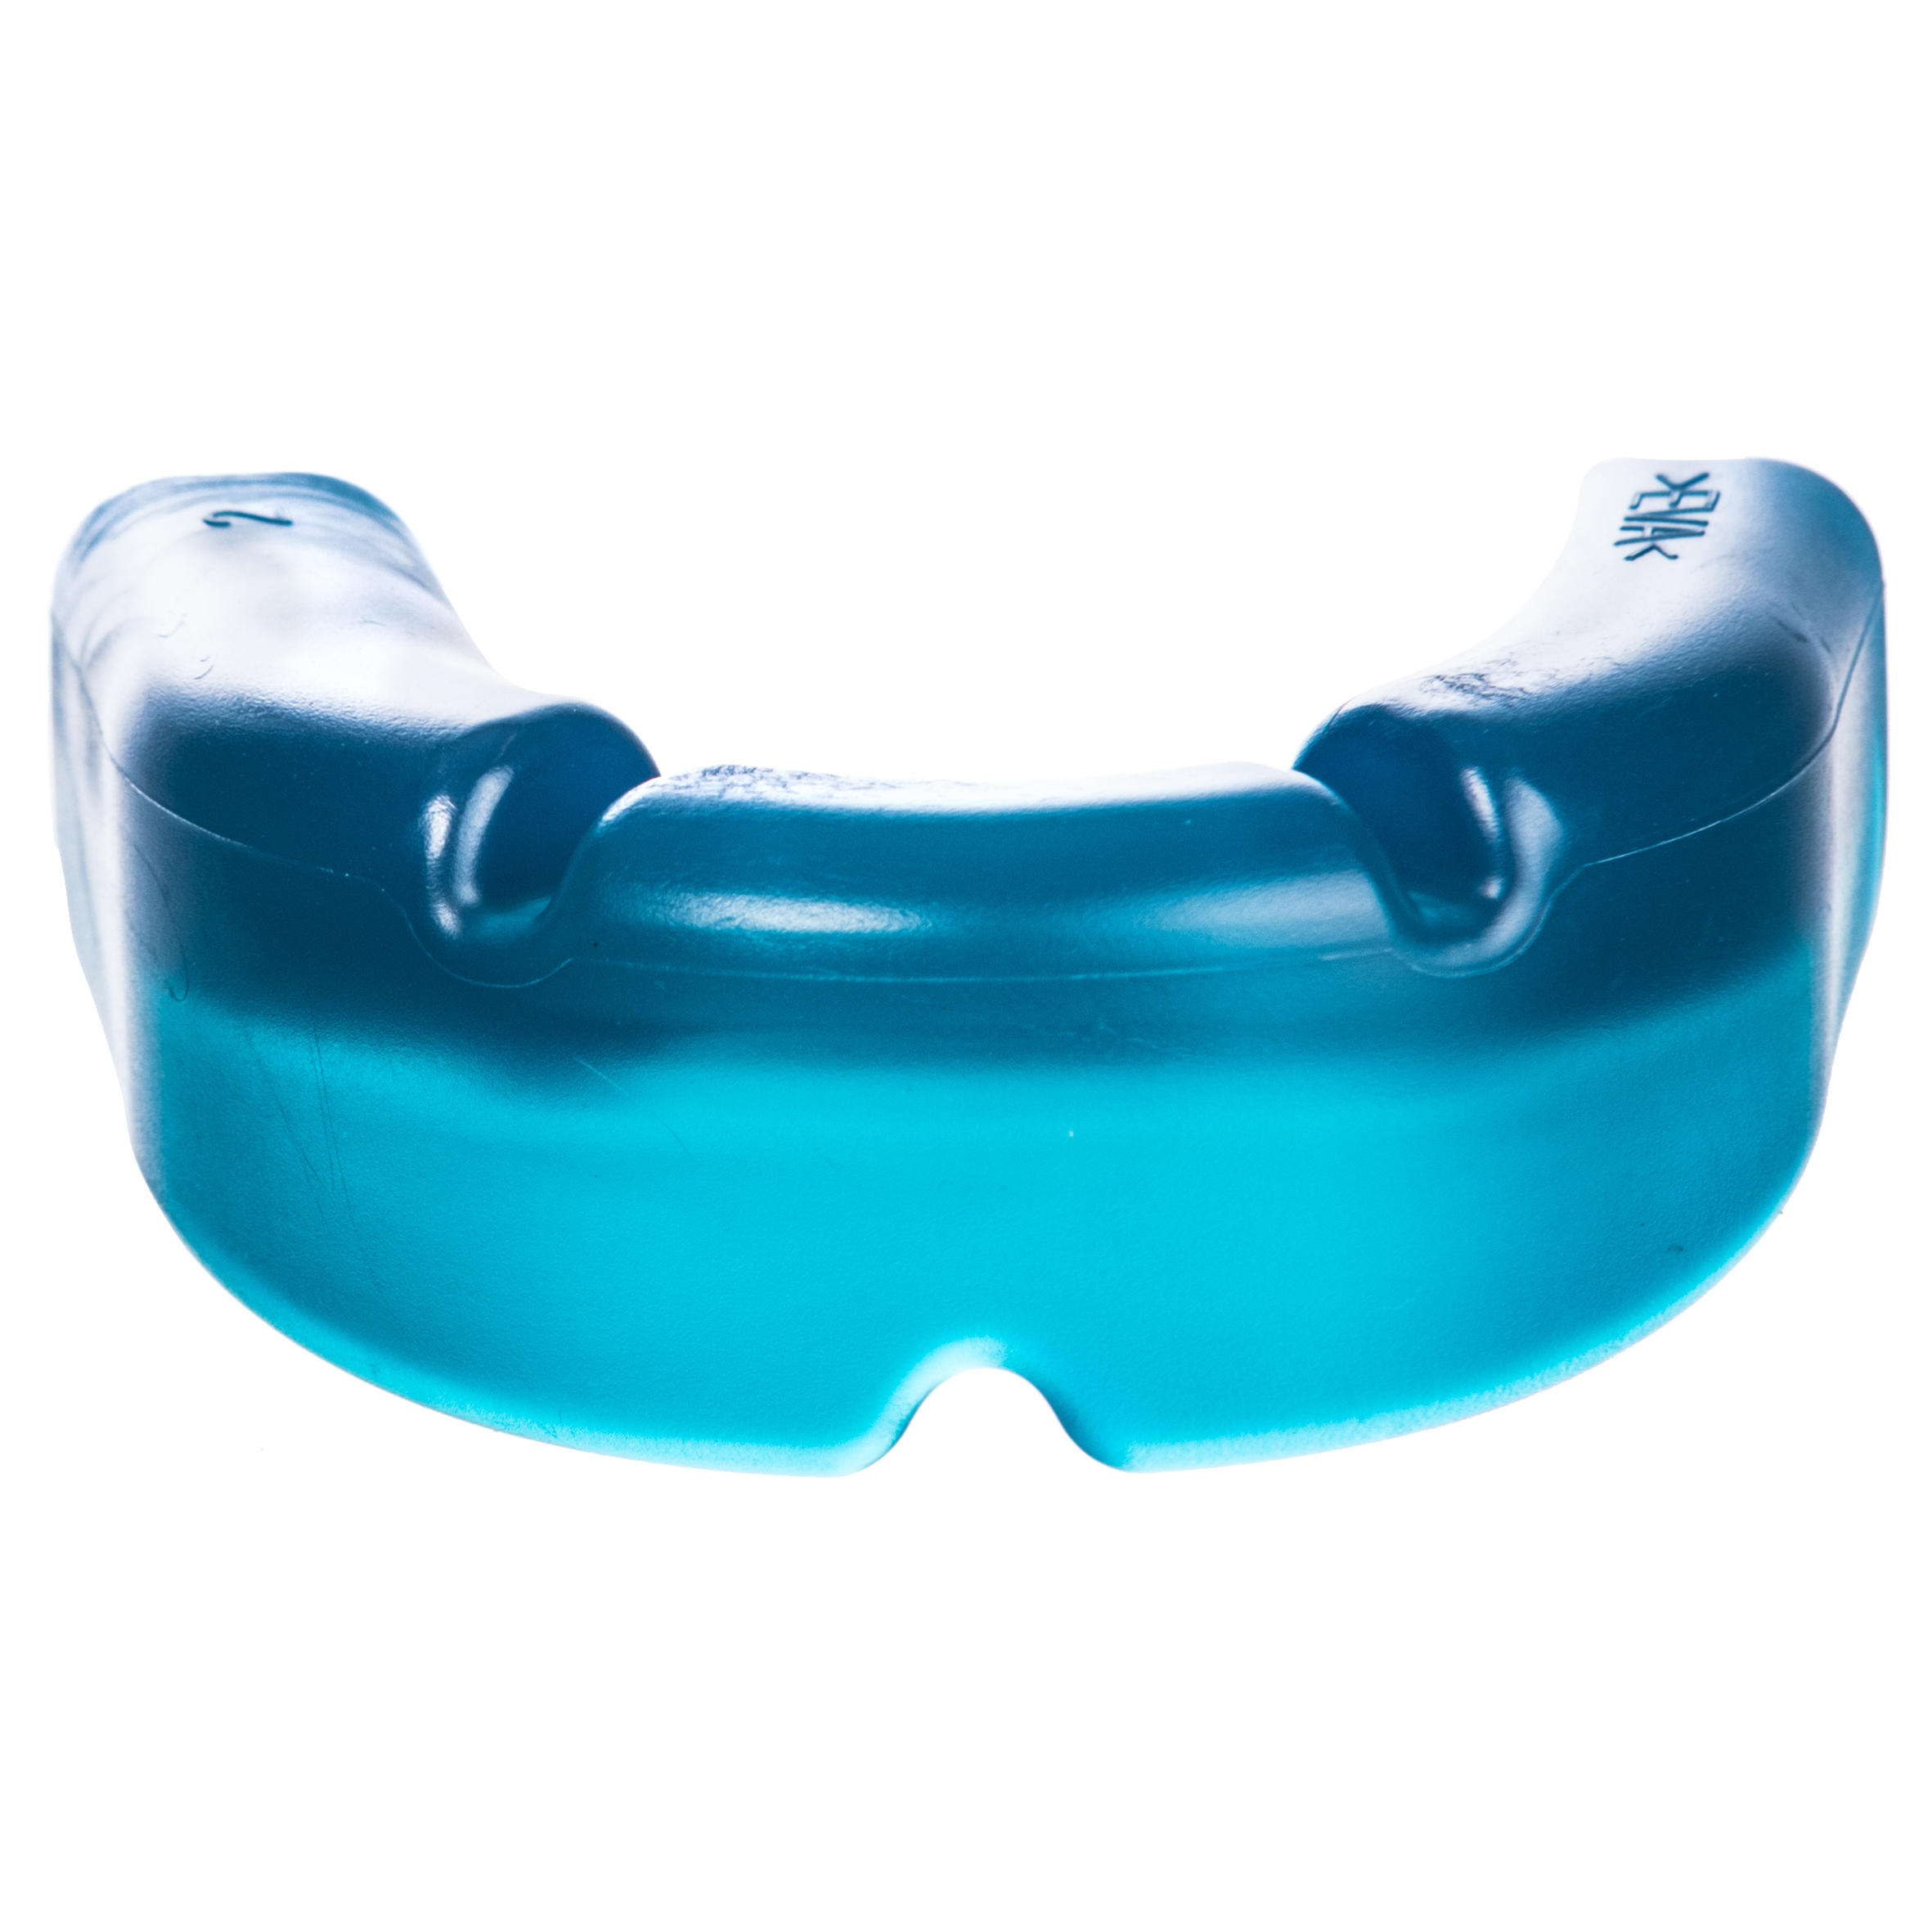 FH100 Adult Large Low-Intensity Field Hockey Mouthguard - Turquoise 8/9